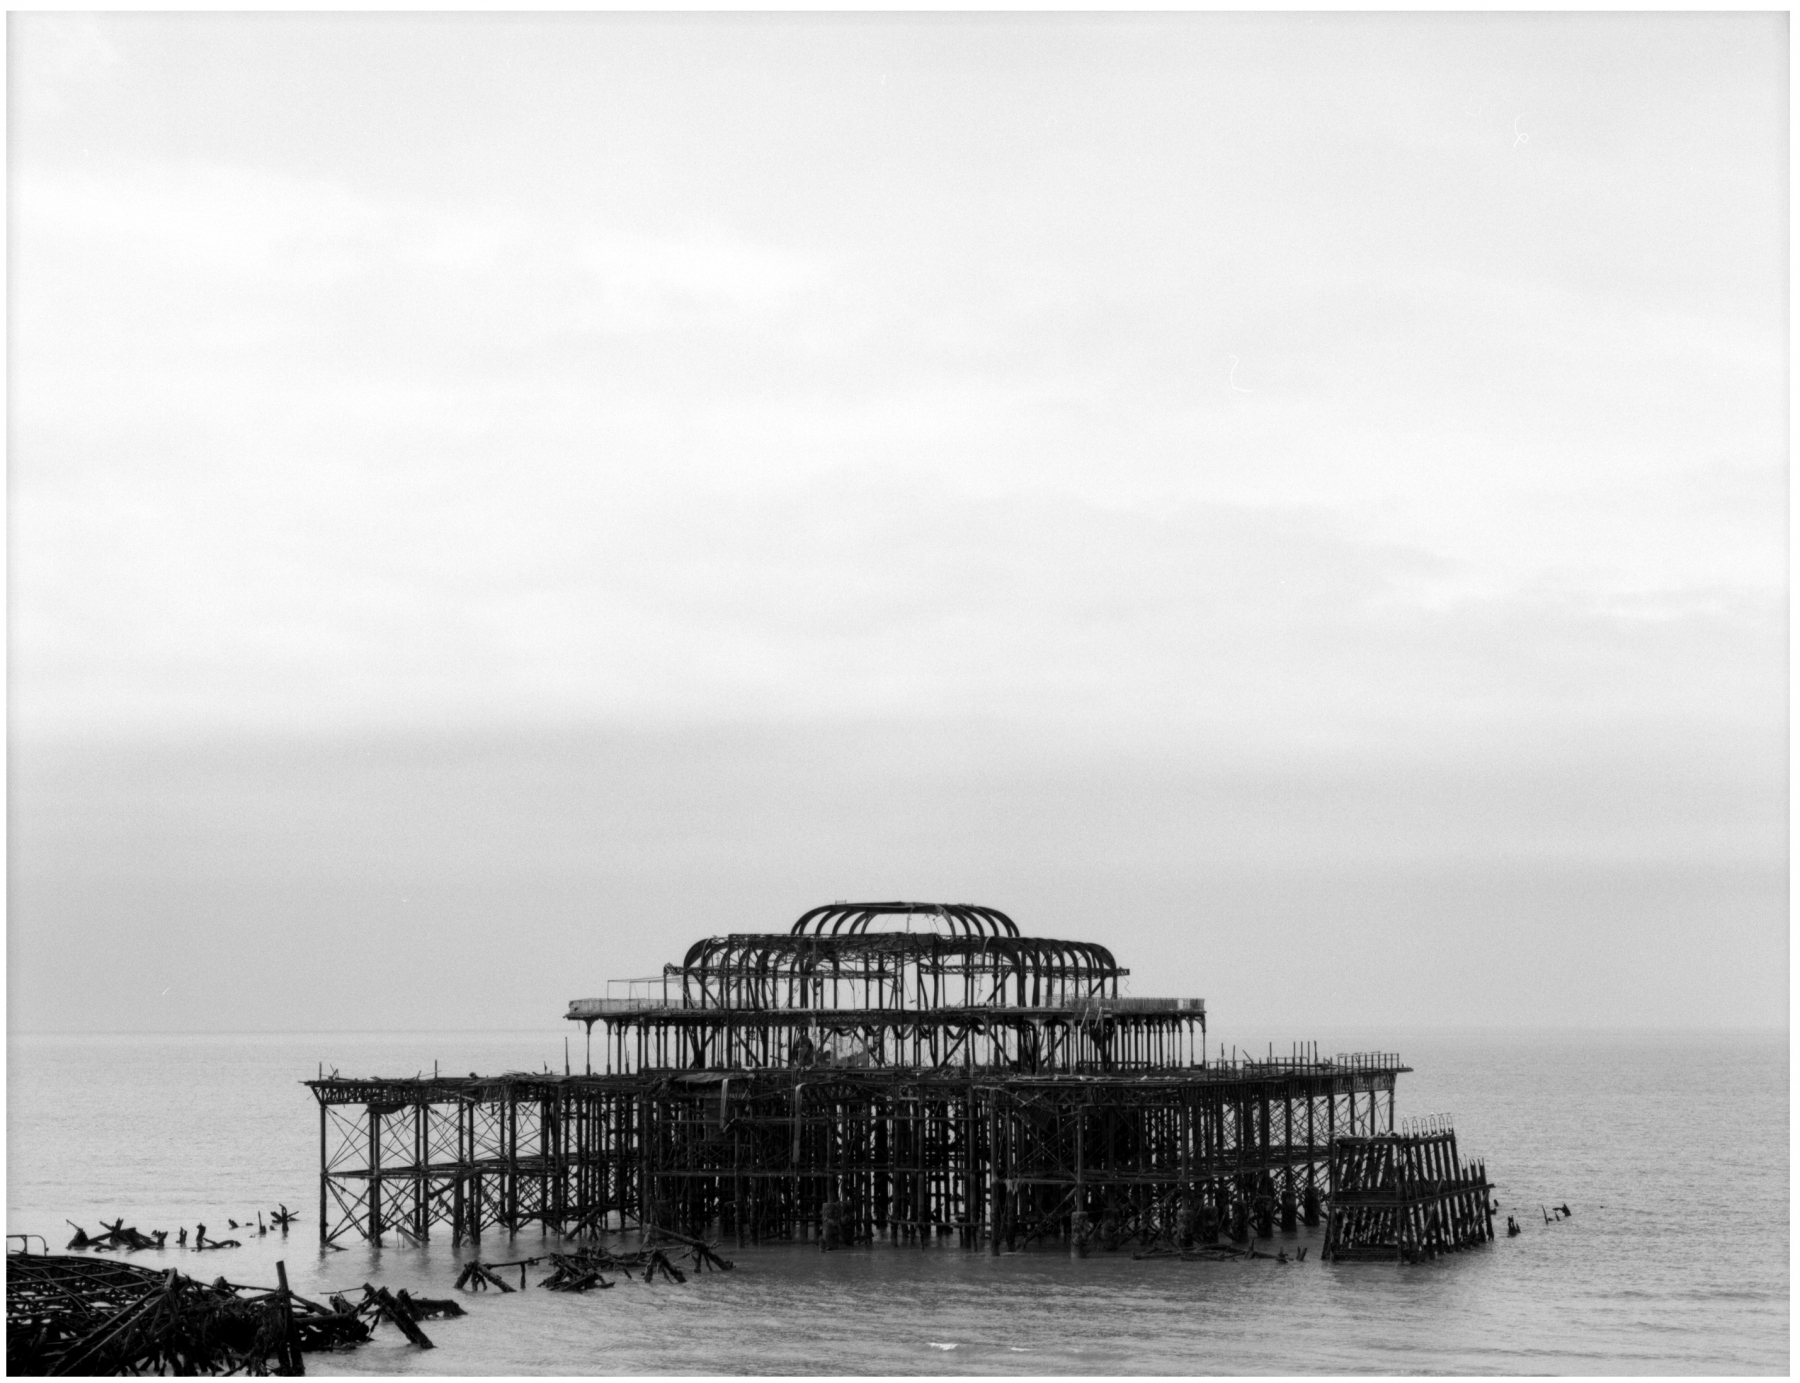 &amp;nbsp;

FIONA TAN

&amp;nbsp;

West Pier II
2006
black and white photograph printed on Baryta paper
23 1/4 x 31 1/8 inches
&amp;nbsp; (59.1 x 79.1 cm)
Edition 4 of 6
PF2015

&amp;nbsp;